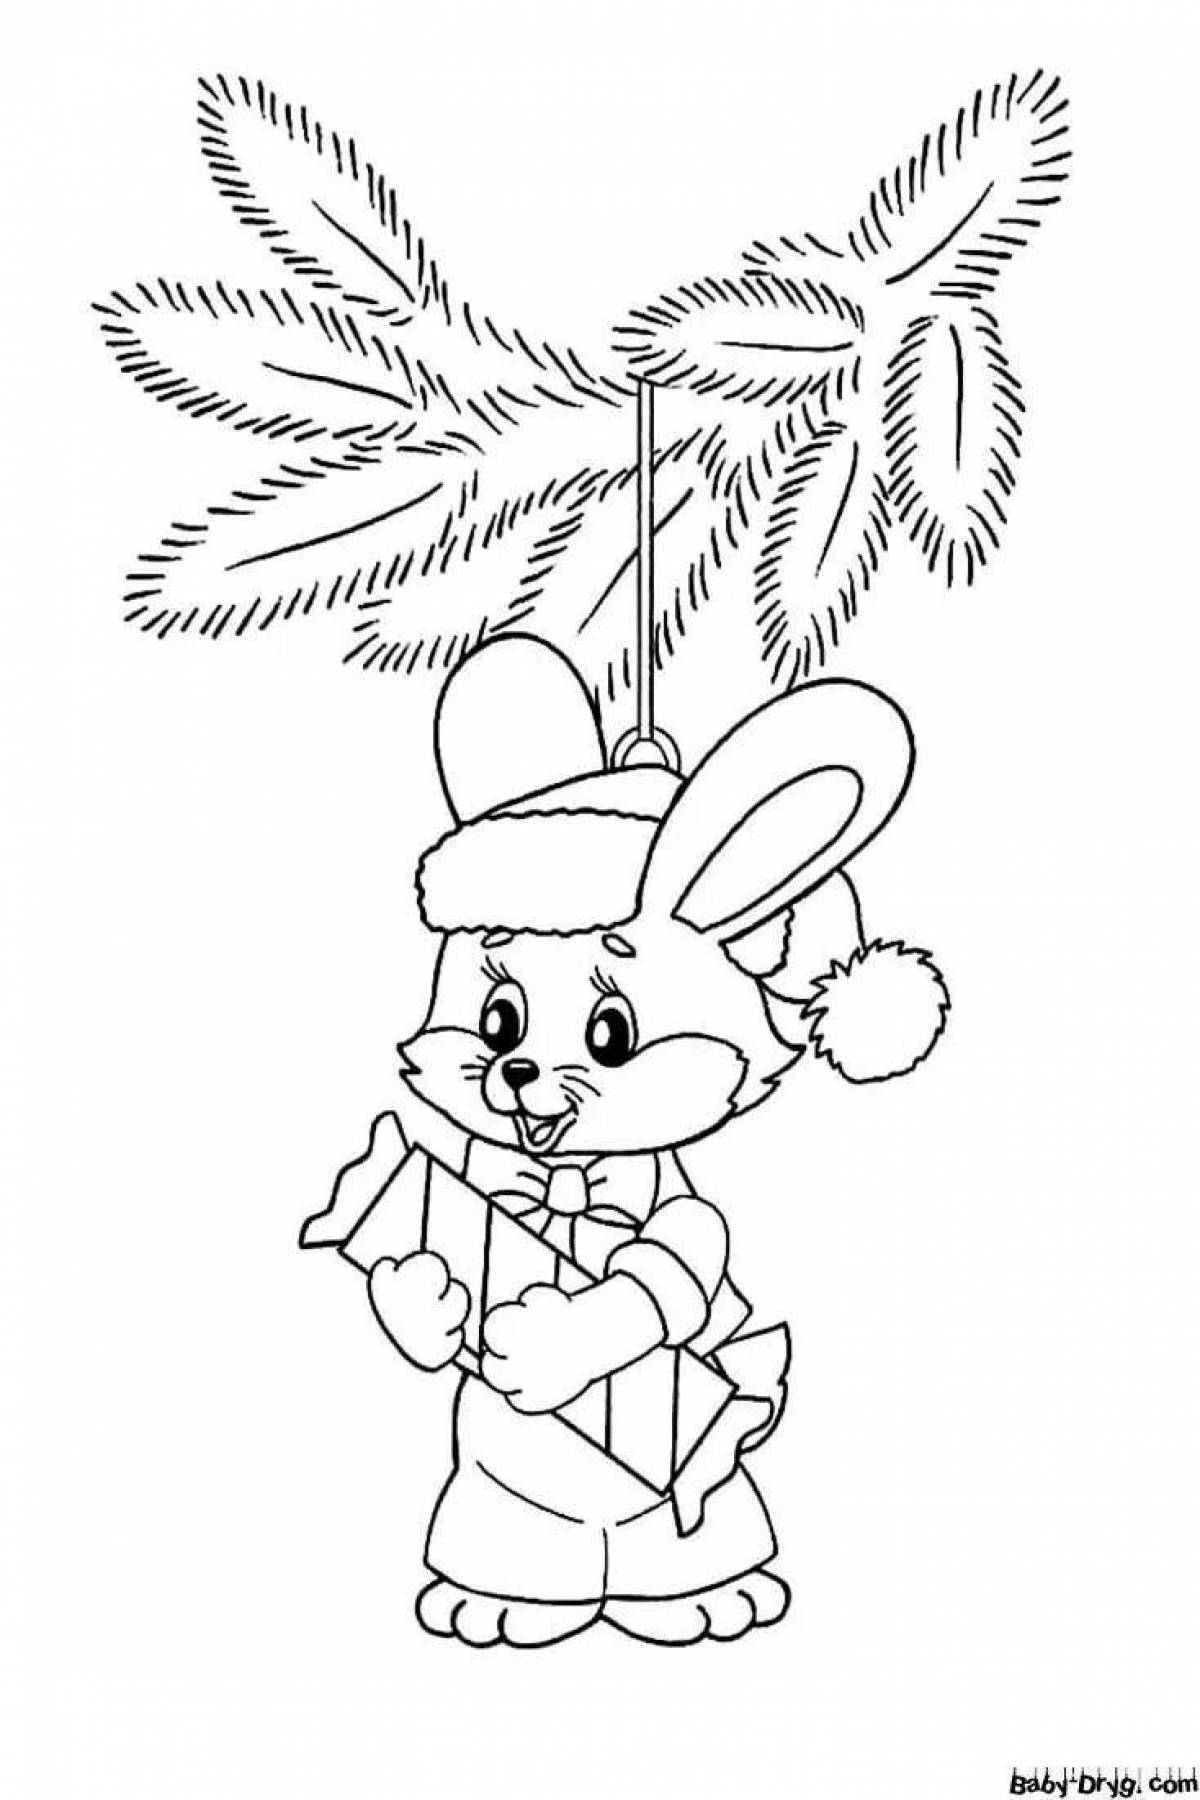 Fairy coloring bunny new year